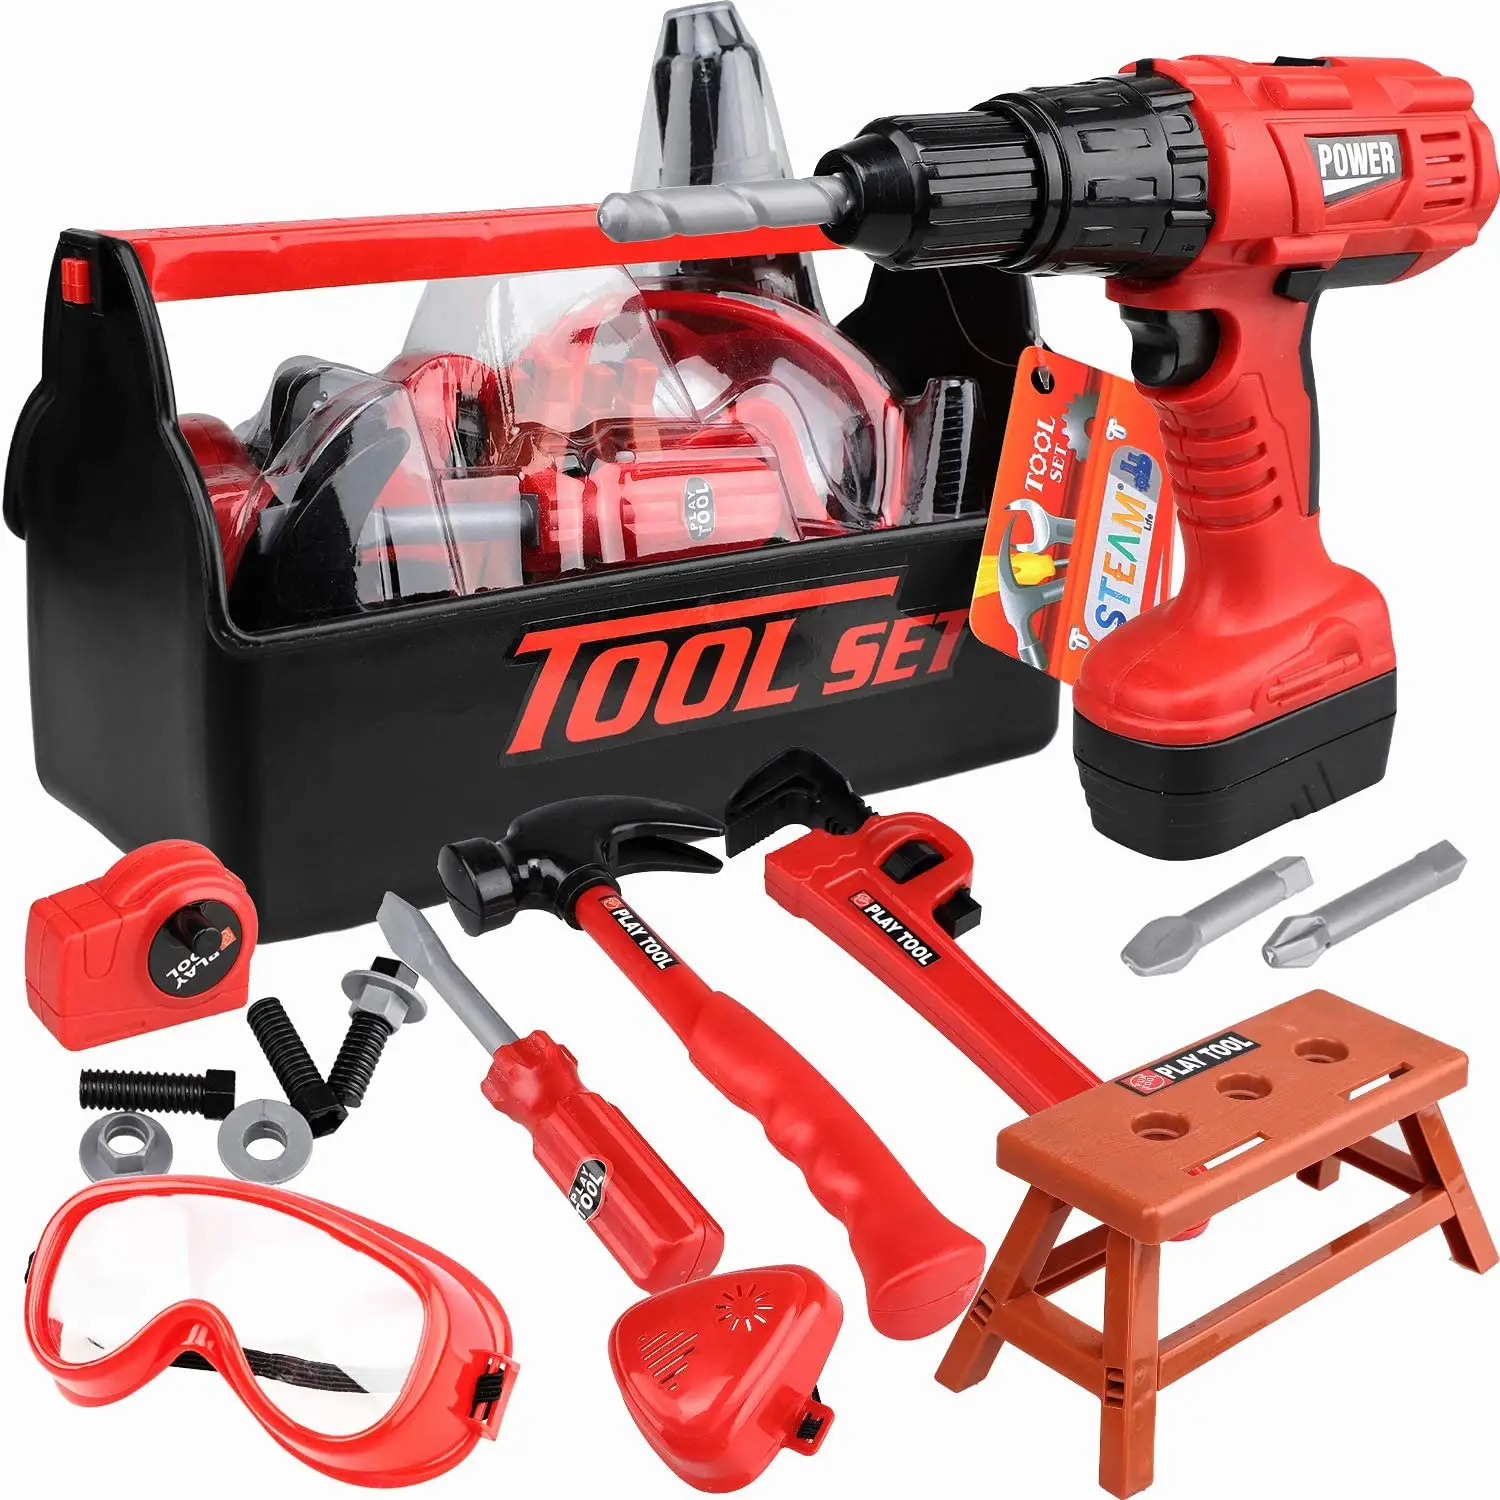 STEAM Kids Tool Set with Power Toy Drill - Toy Tool Set Contains Tool Box and Toy Hammer, Power Drill educational set for kids